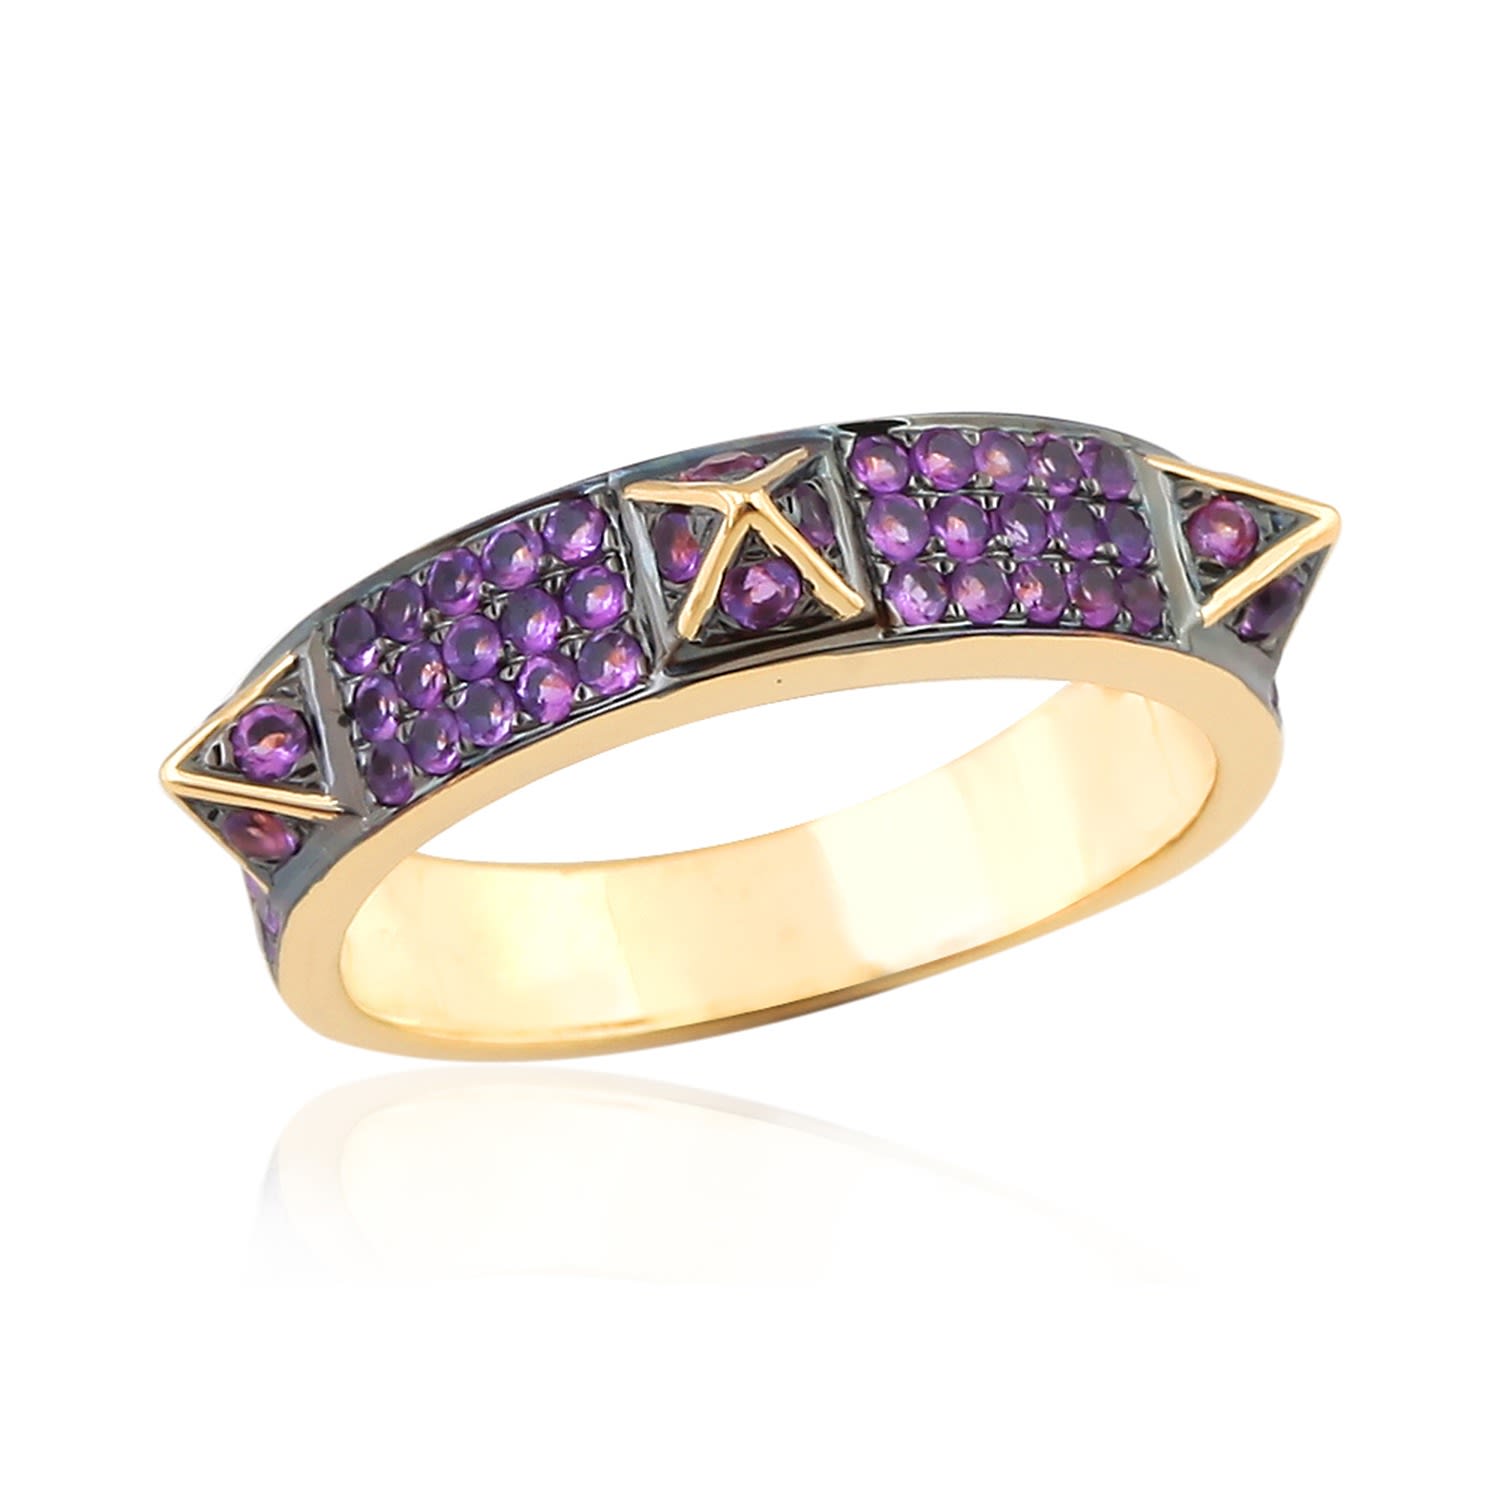 Artisan Women's 18k Gold Spike Ring With Pave Amethyst In Purple